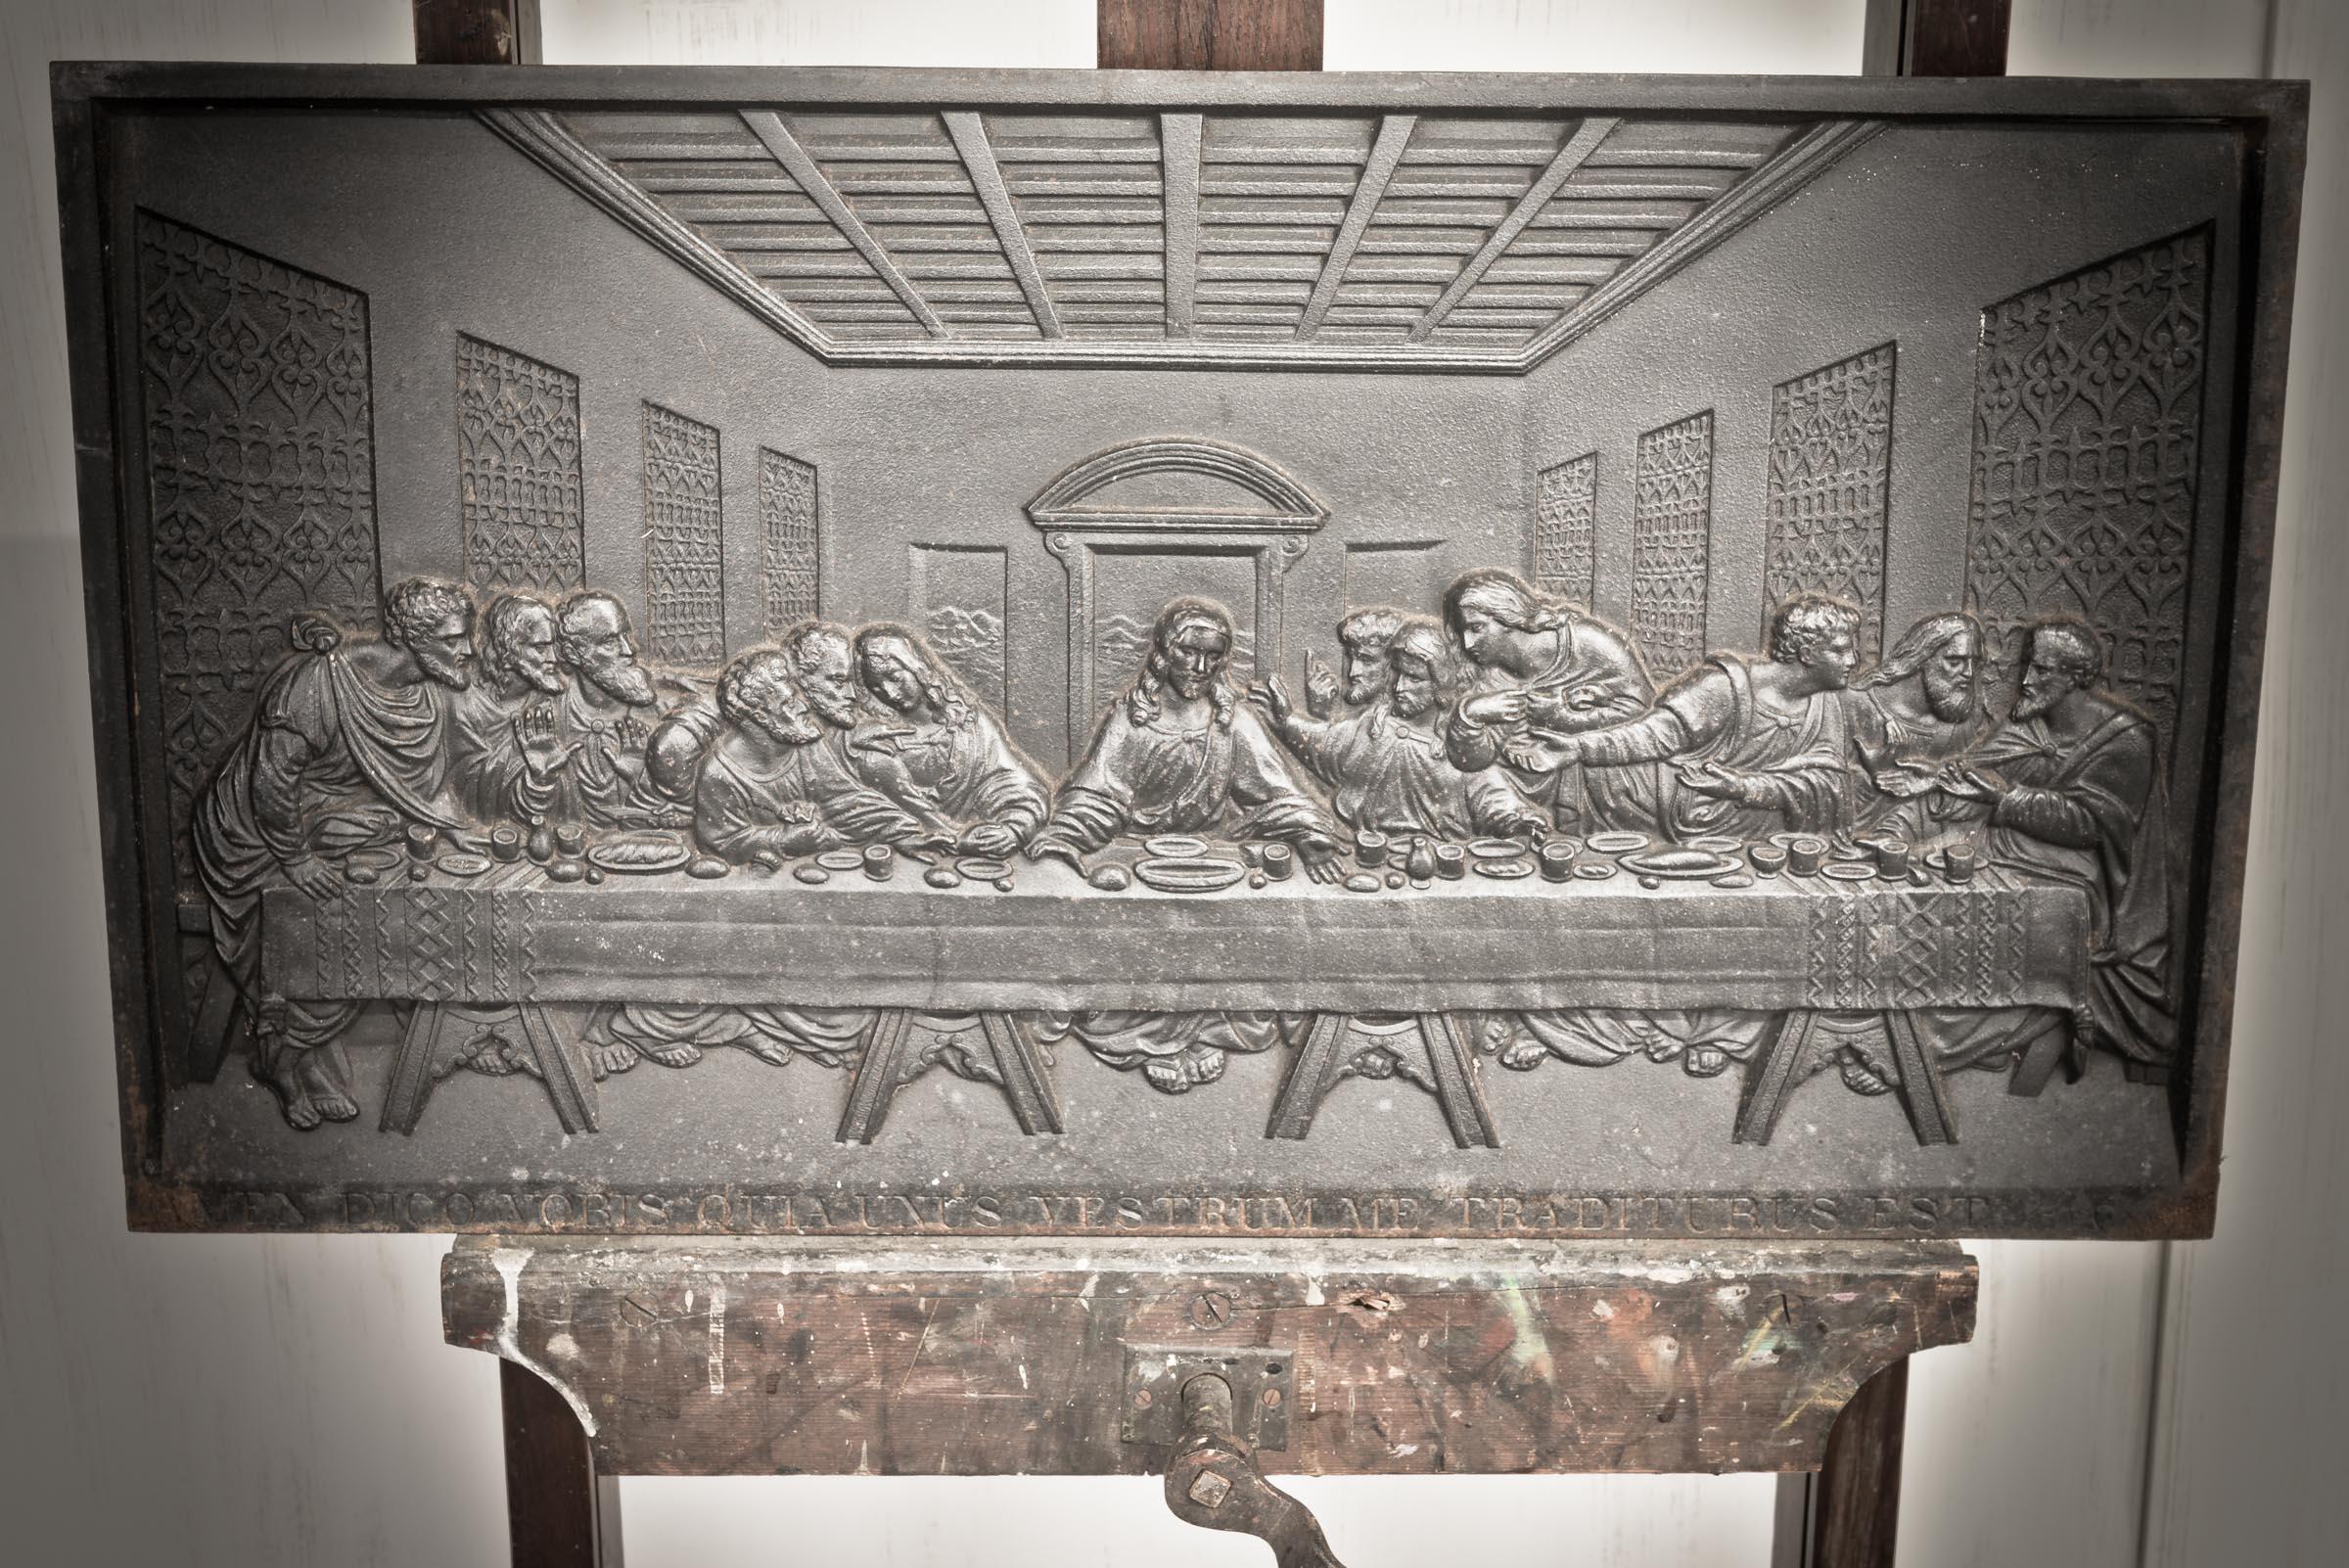 An English Victorian Coalbrookedale cast iron relief-cast plaque of The Last Supper, after Leonardo Da Vinci's late 15th Century original mural. Circa 1878. The design originated at Coalbrookdale and is known to have been copied by various foundries